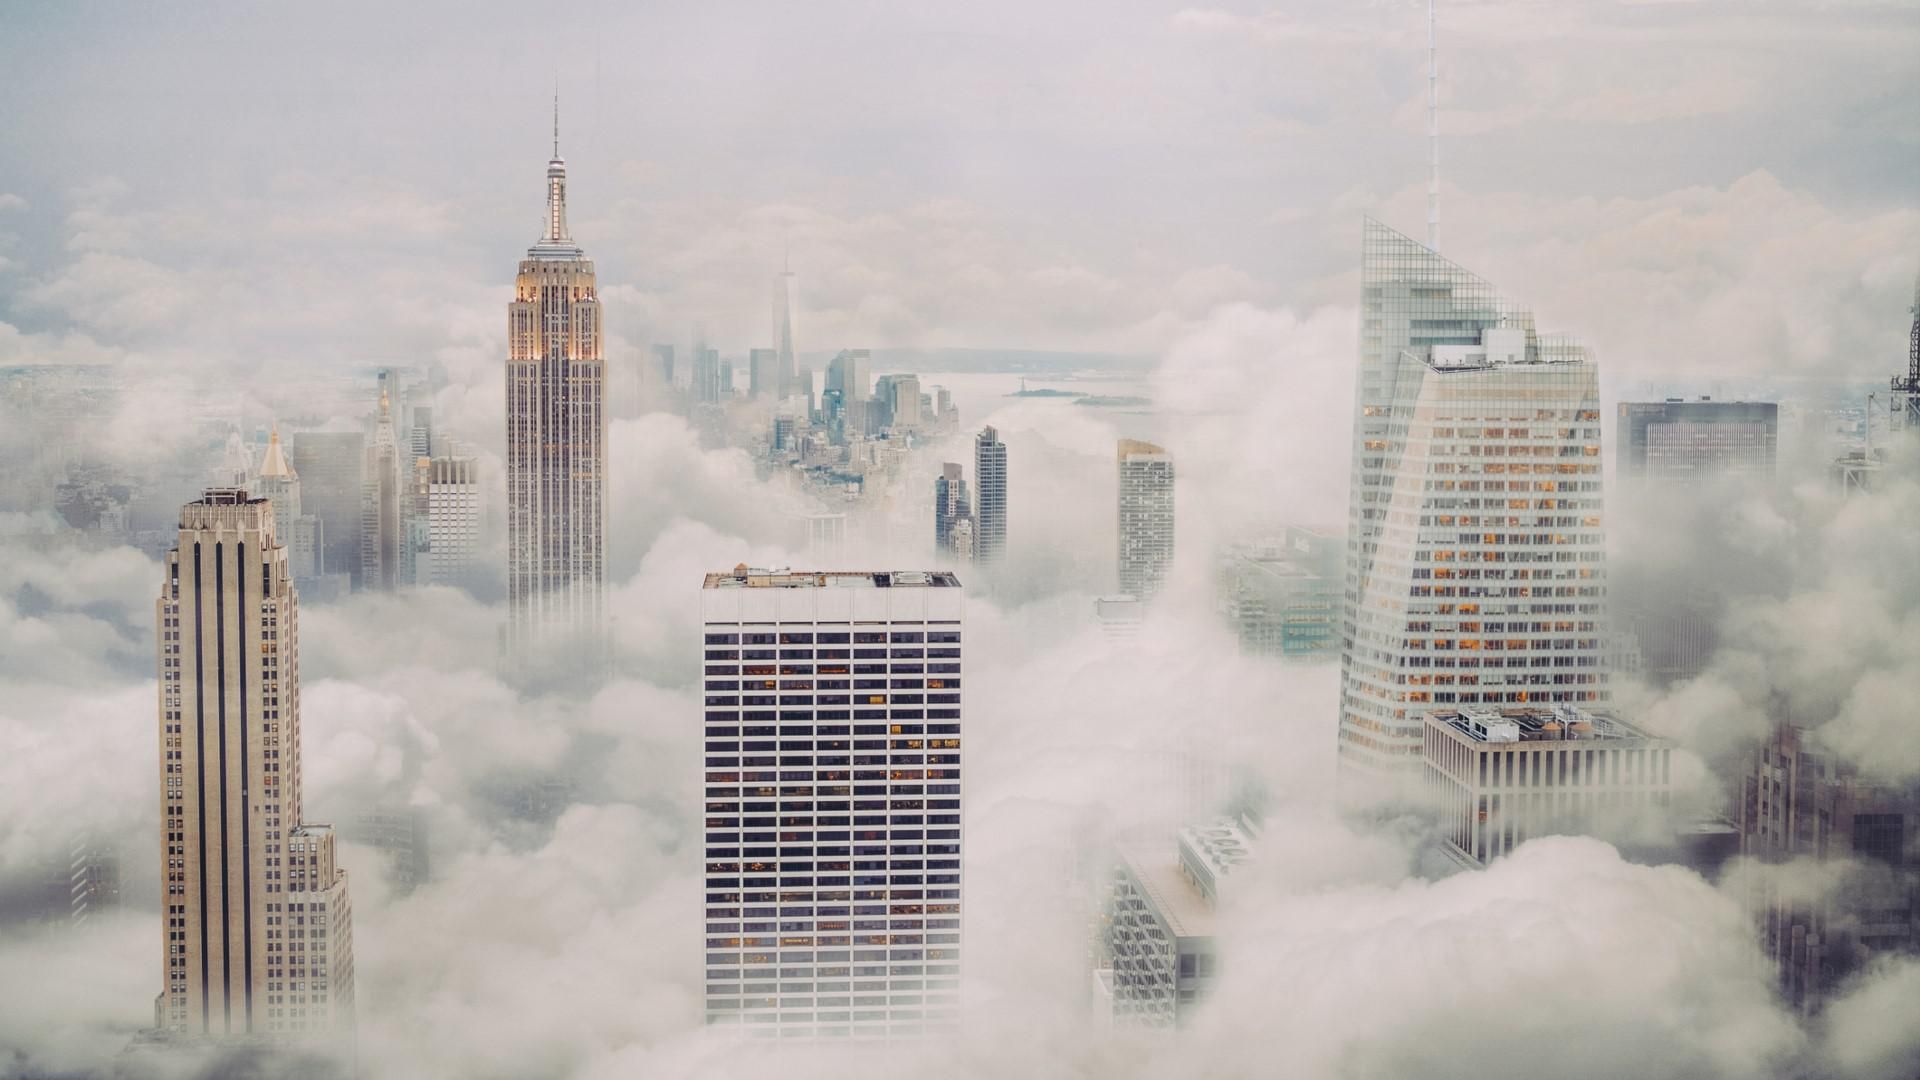 New York City with low clouds